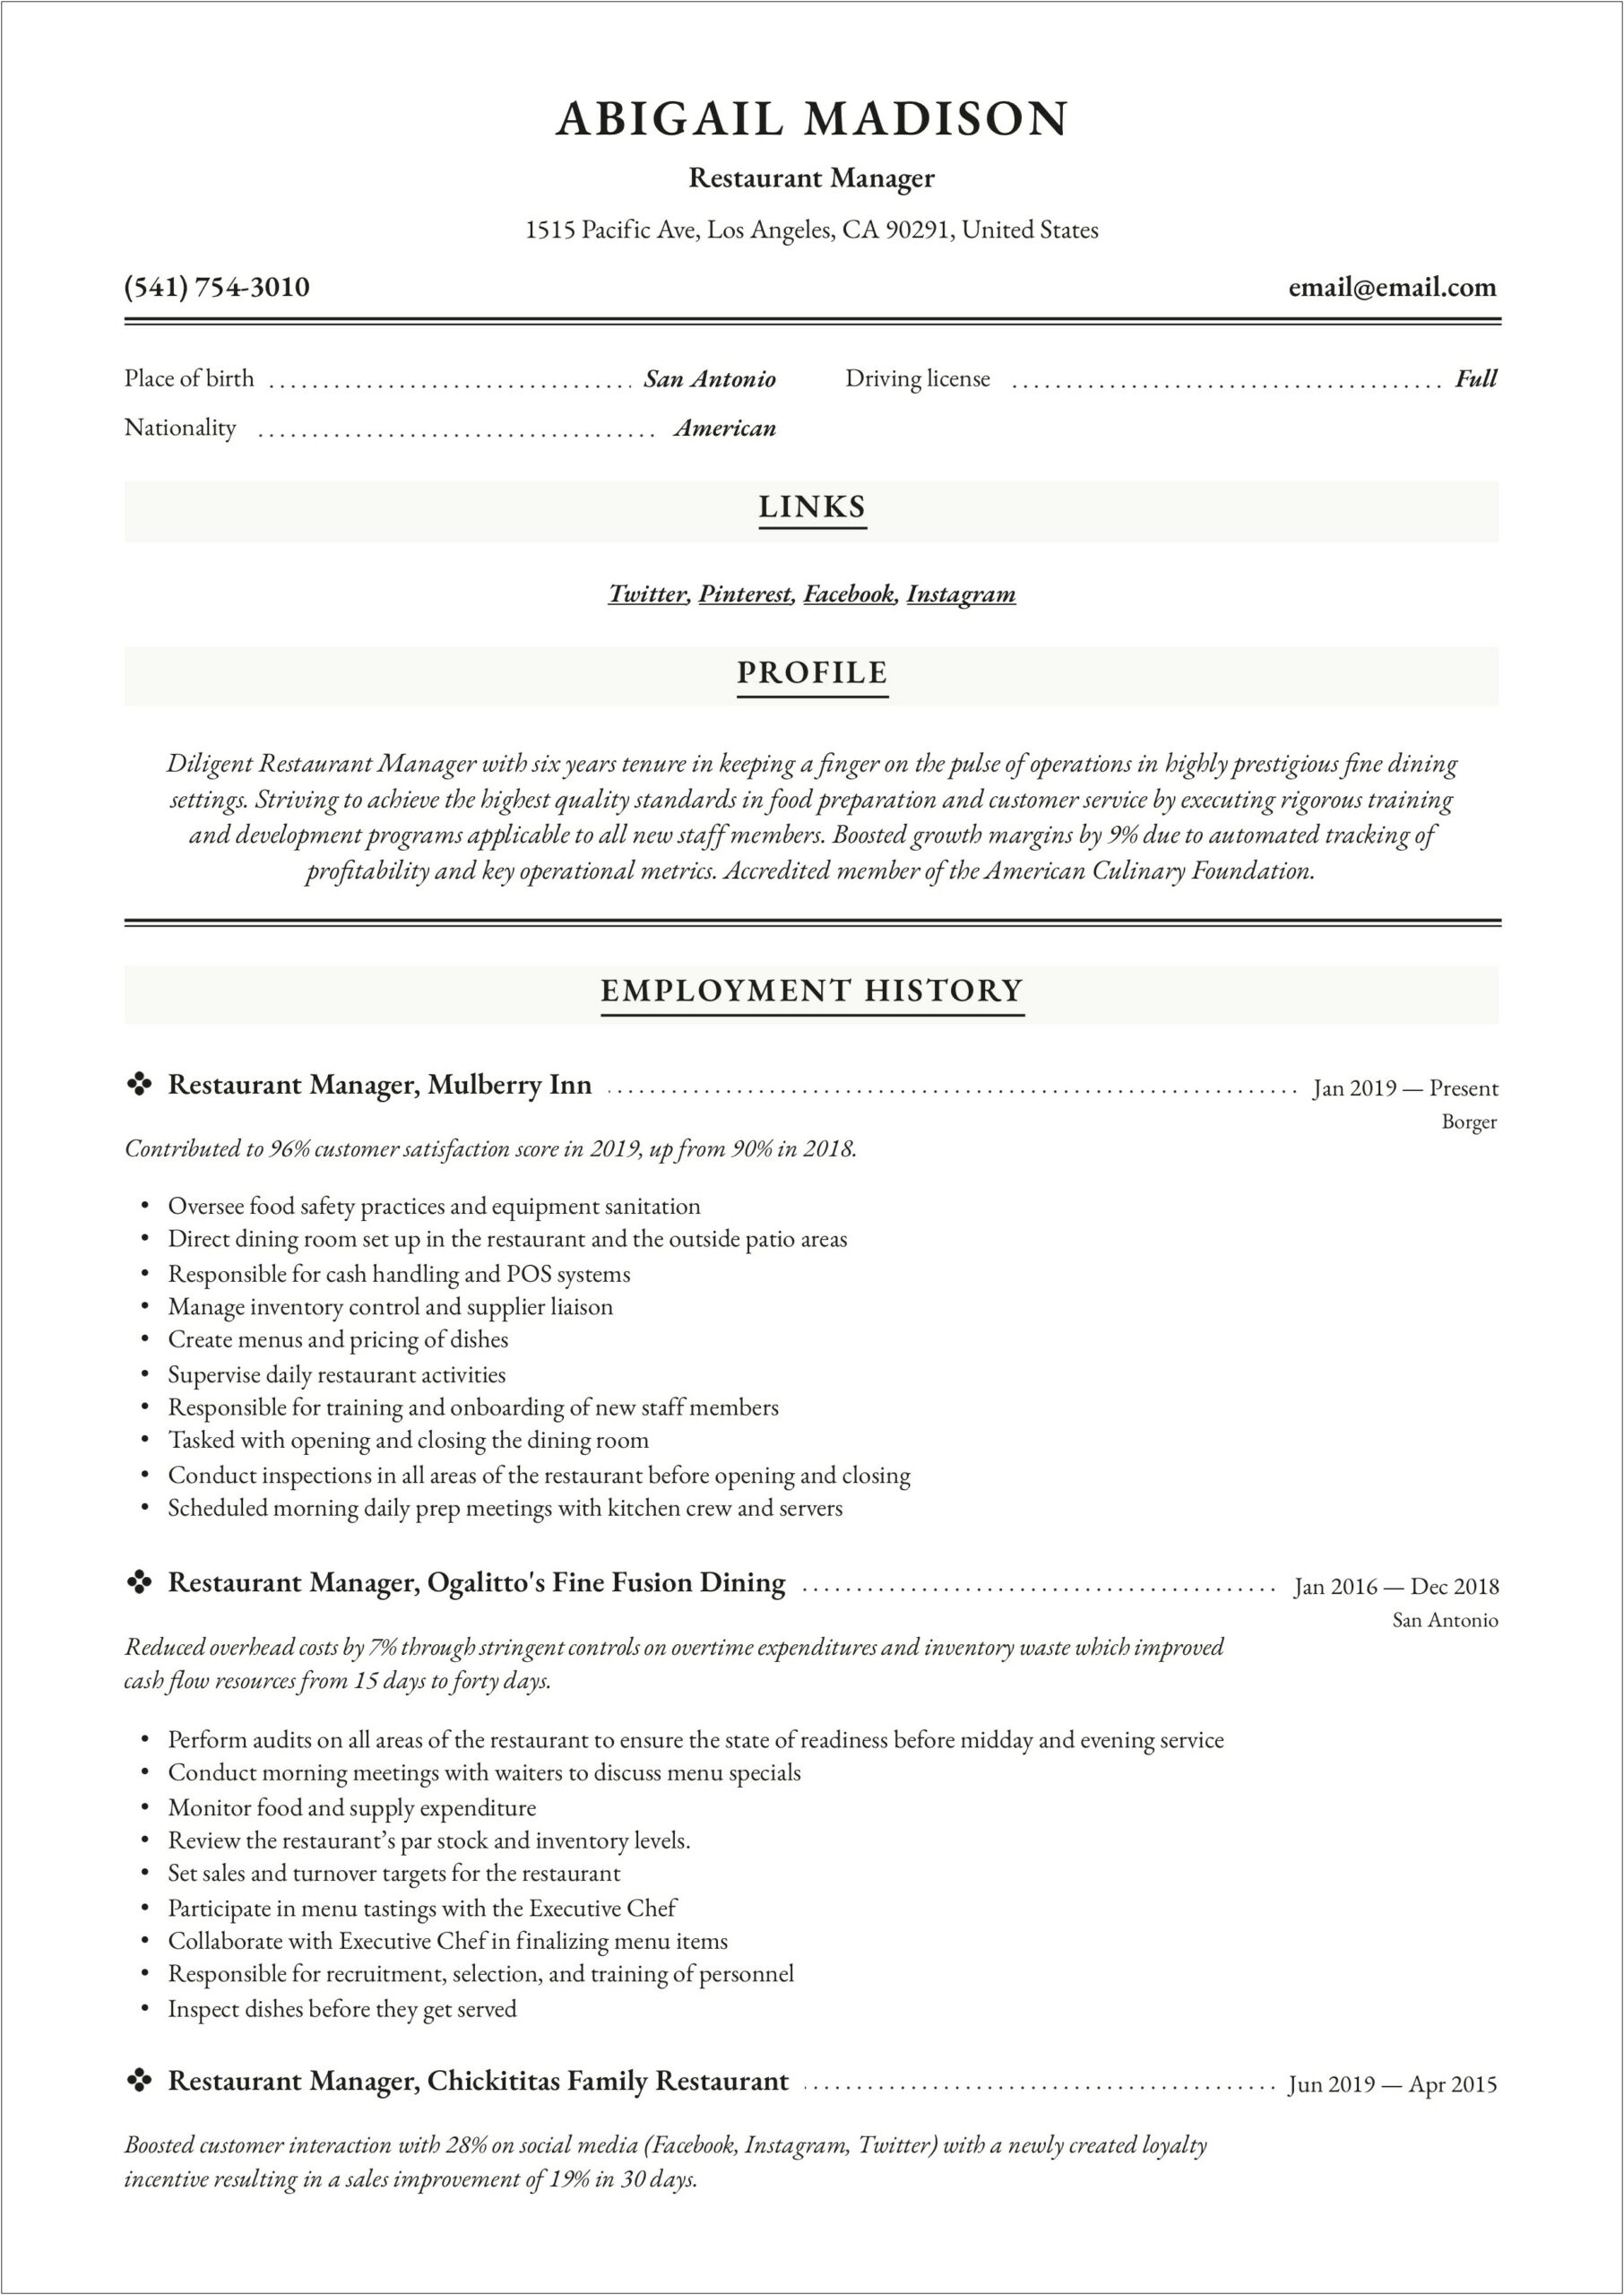 Resume For Mexican Resturant Manager